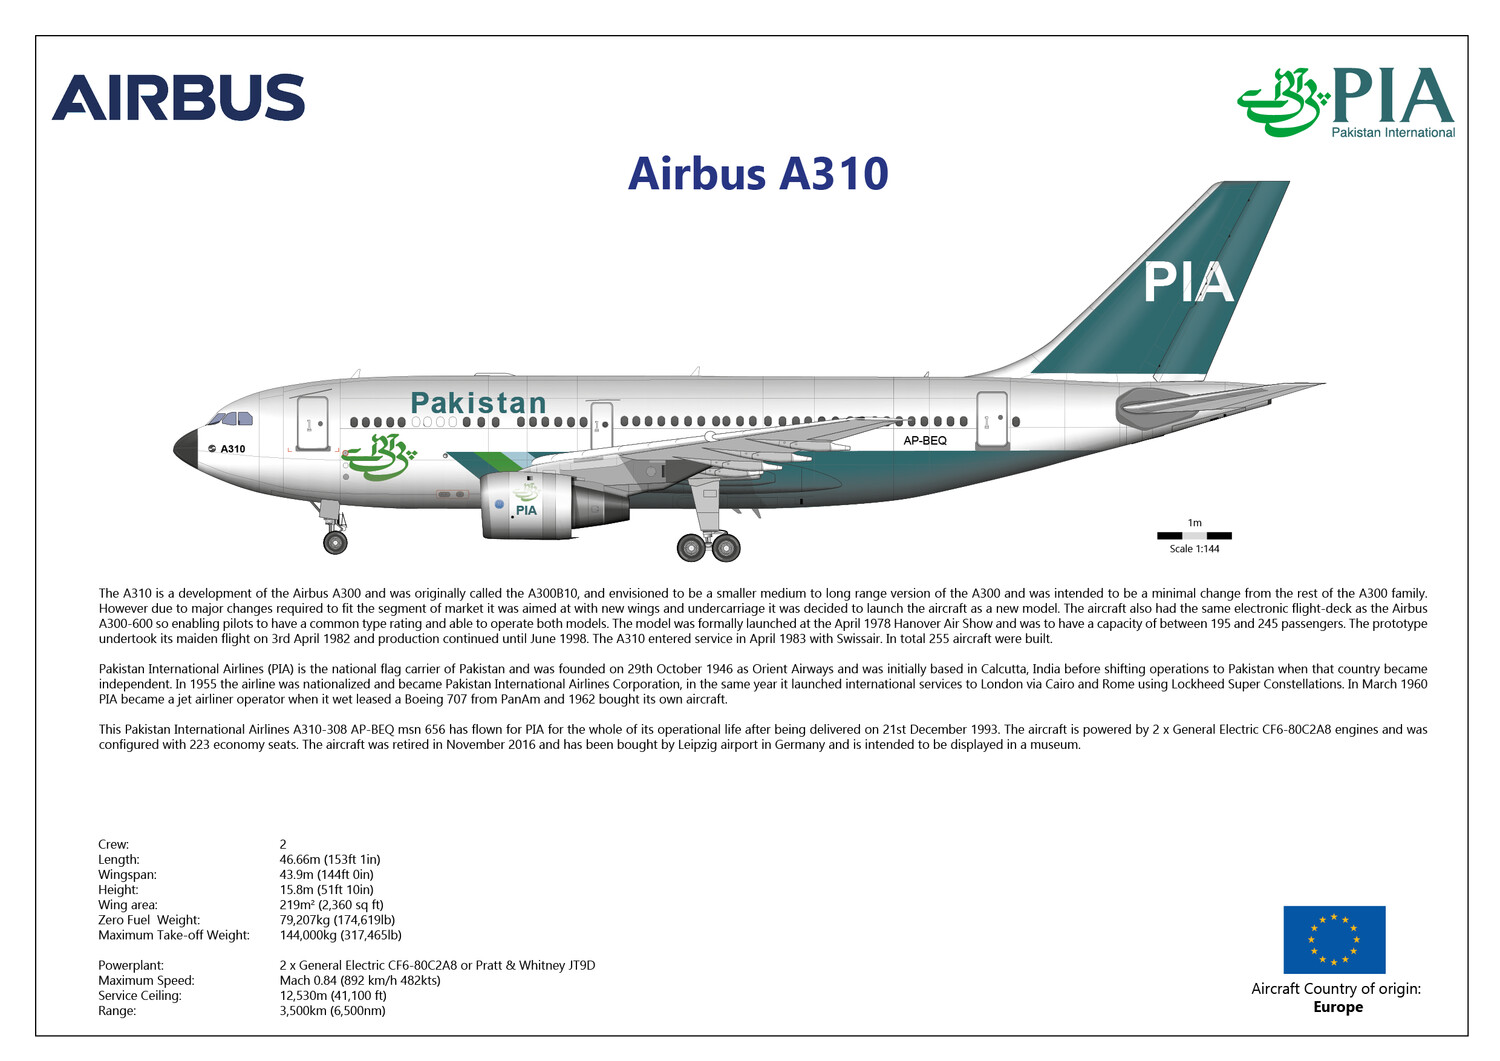 Airbus A310-300 of Pakistan International Airlines AP-BEQ - Layout B